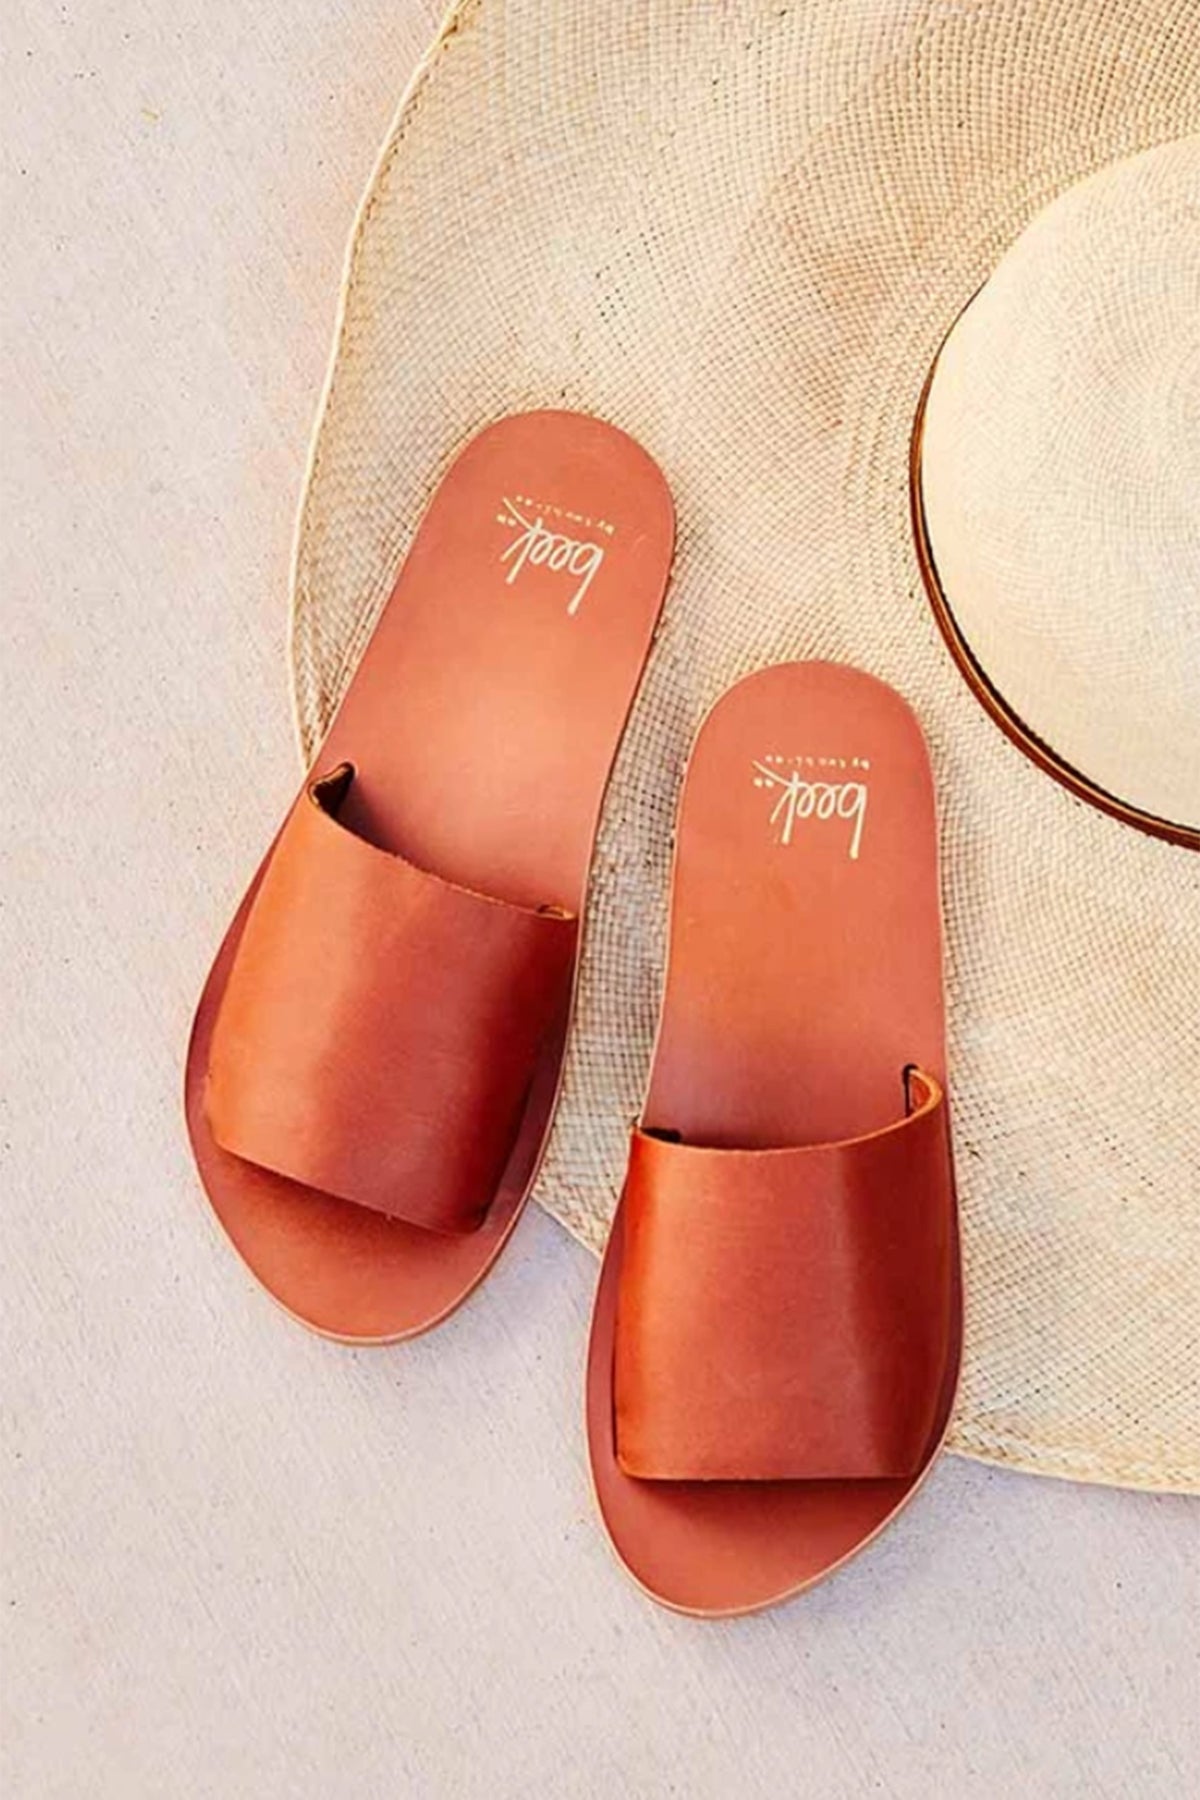   a pair of brown Mockingbird sandals by Beek with a straw hat. 